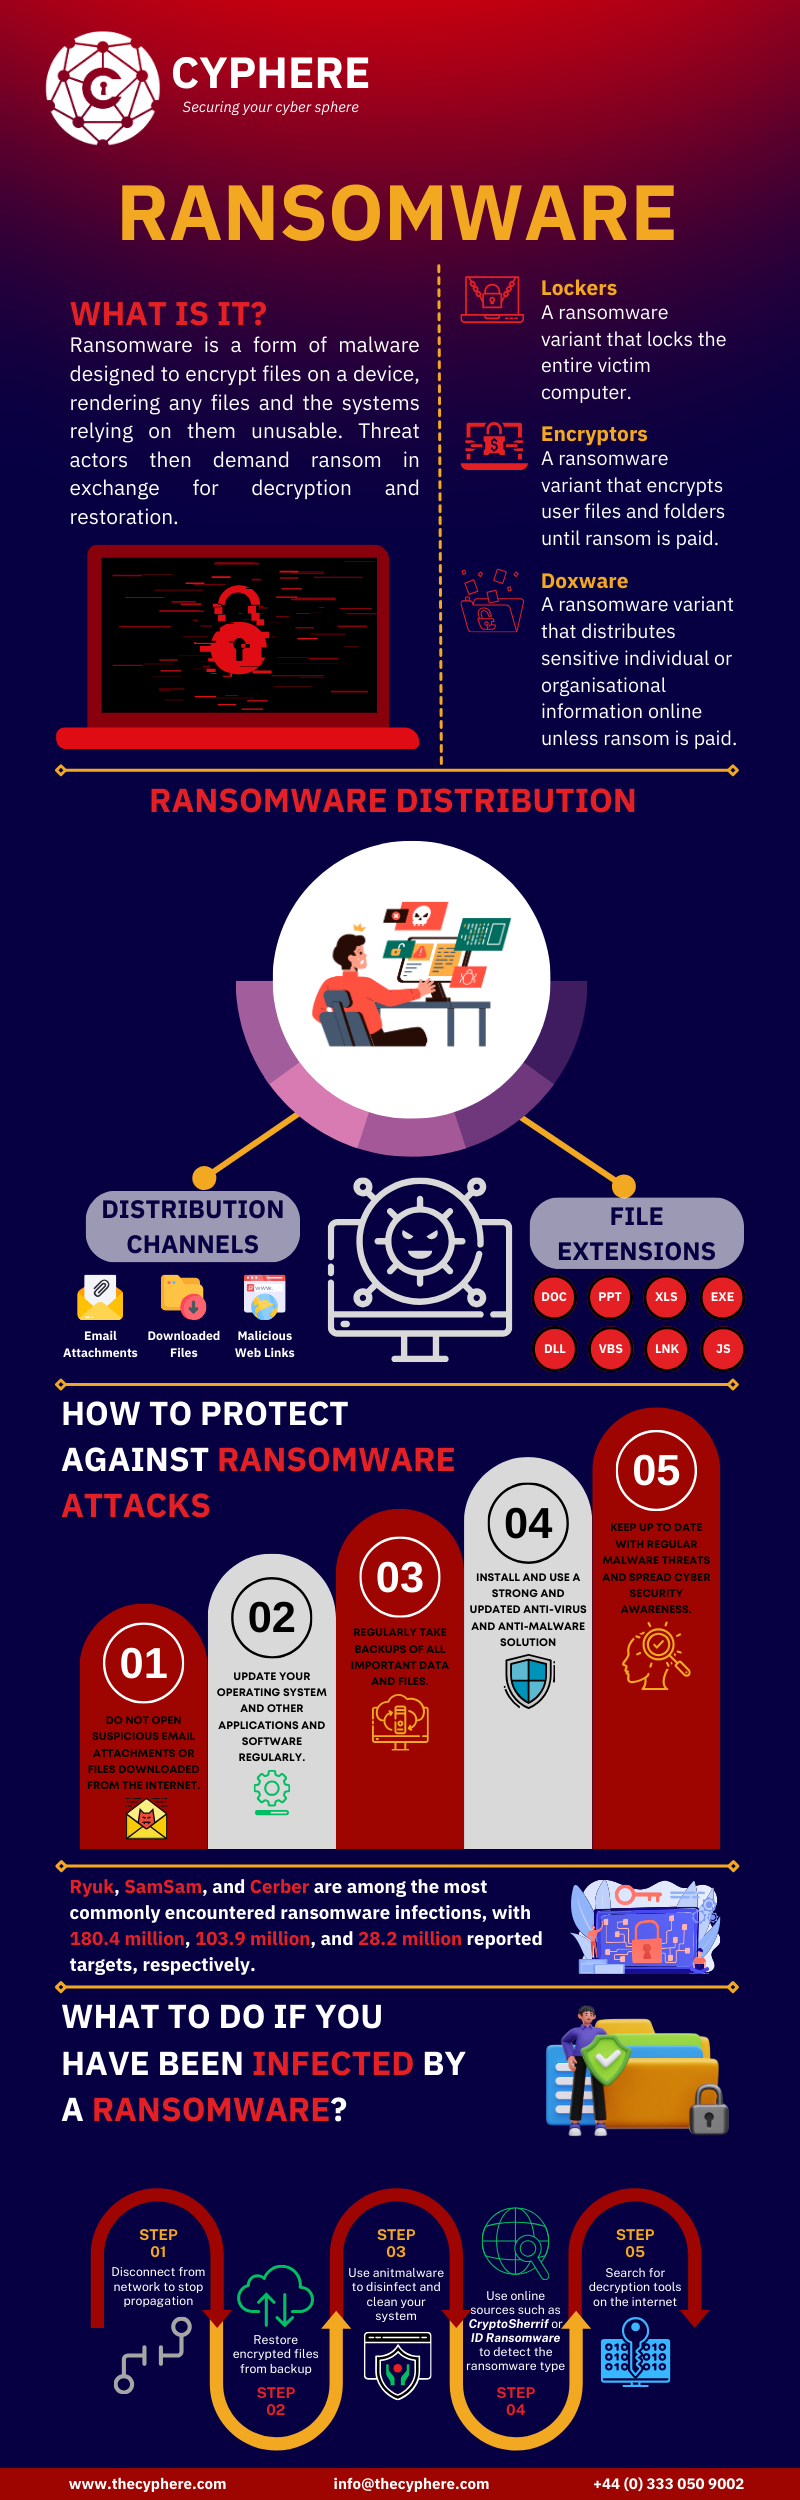 Ransomware payment